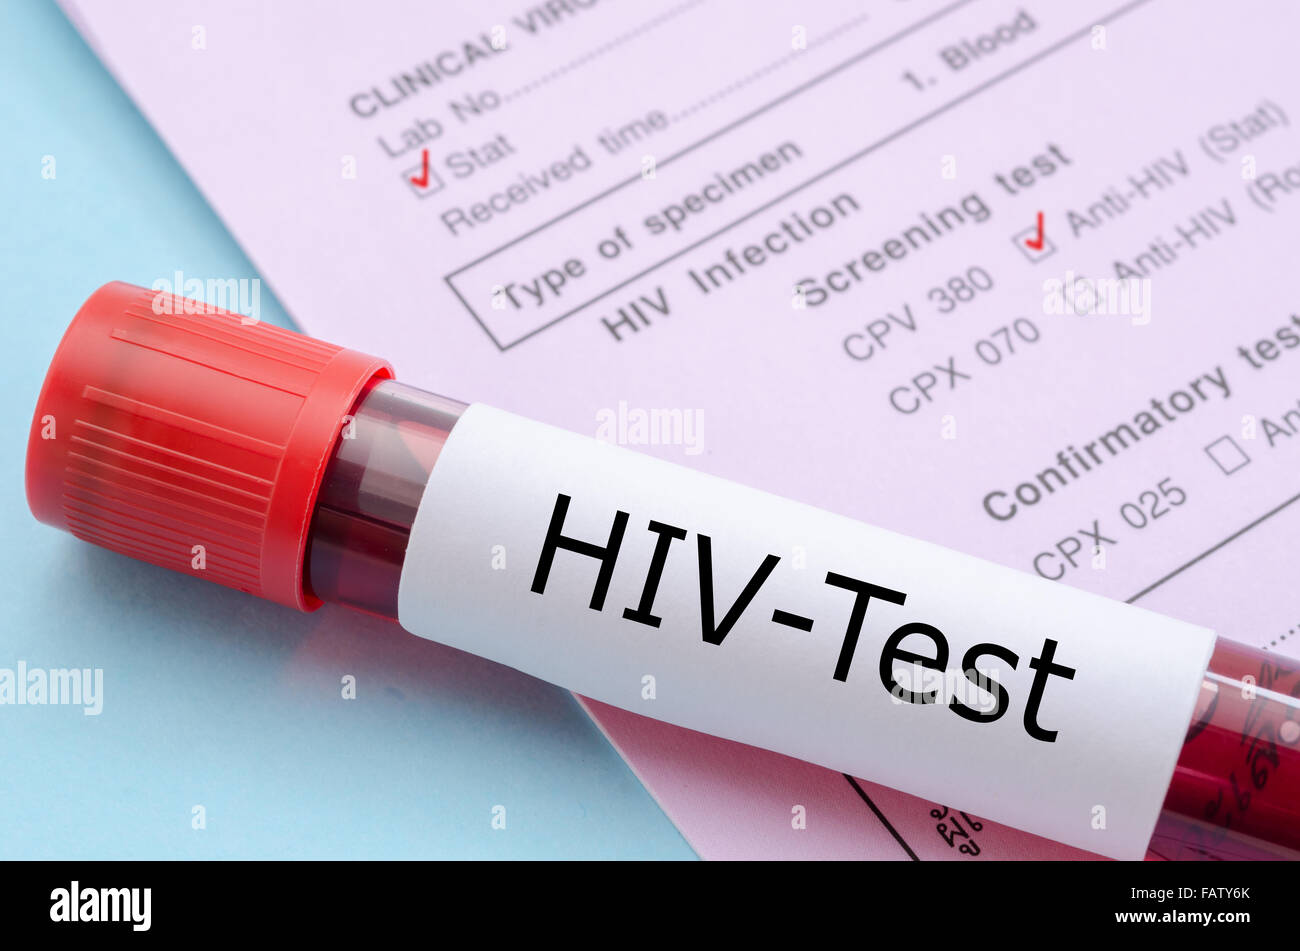 Sample blood collection tube with HIV test label on HIV infection screening test form. Stock Photo